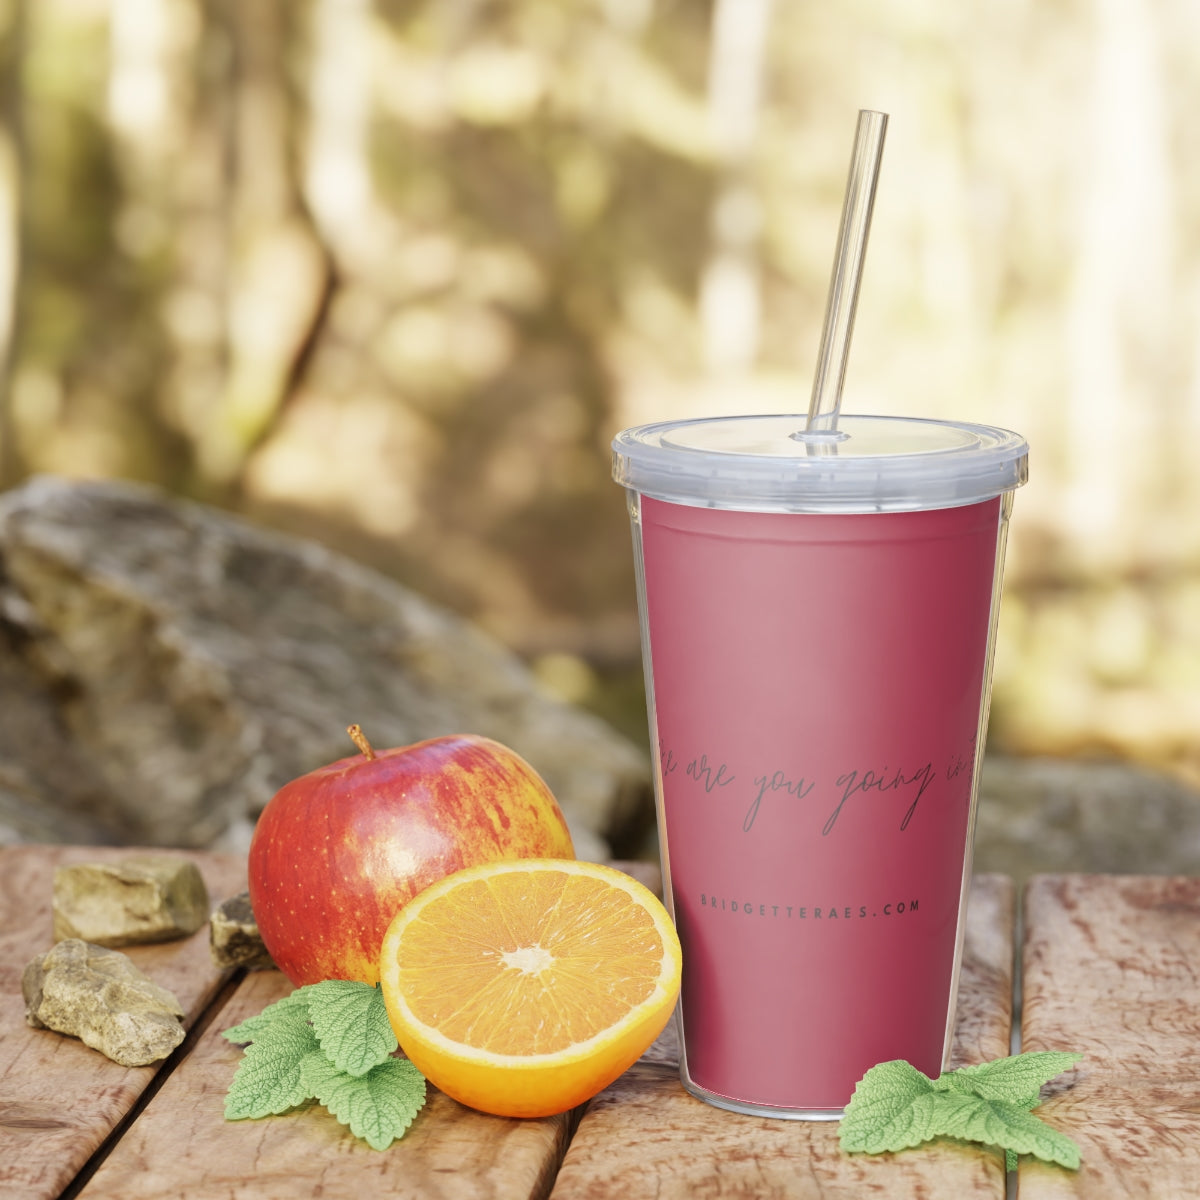 Where Are You Going In that? Plastic Tumbler with Straw in Viva Magenta